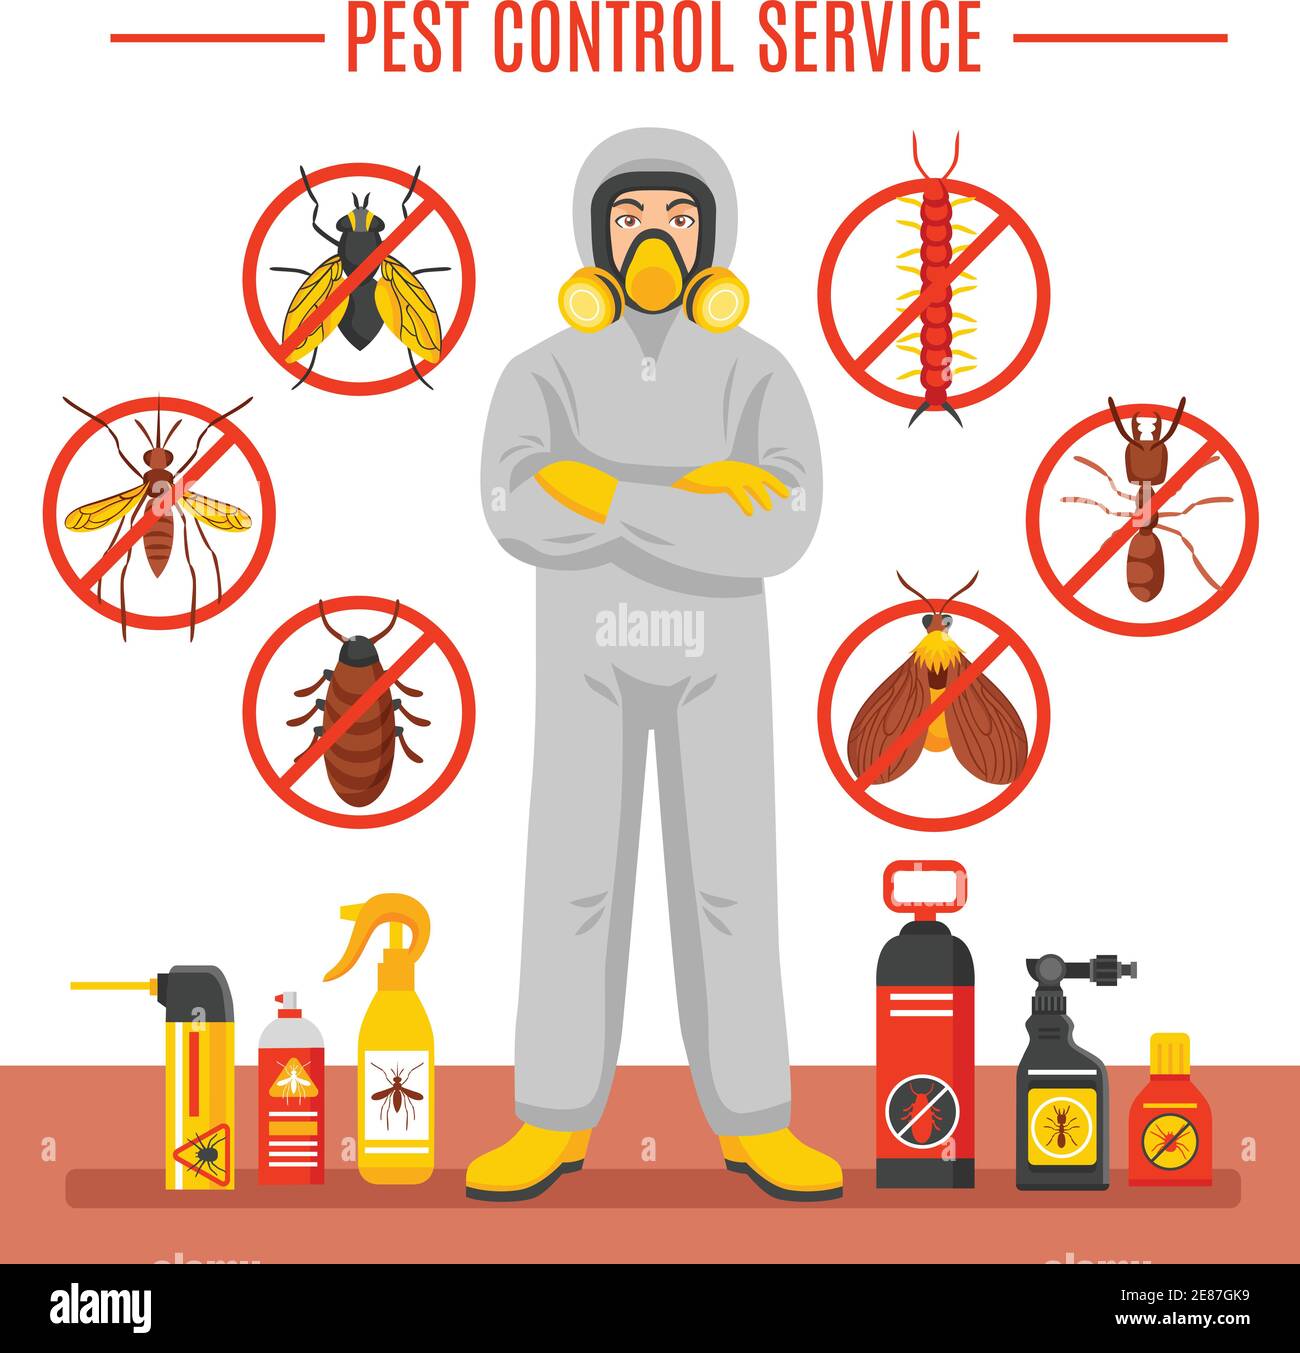 Pest control service vector illustration with exterminator of insects in chemical protective suit termites and disinfection cans flat icons Stock Vector